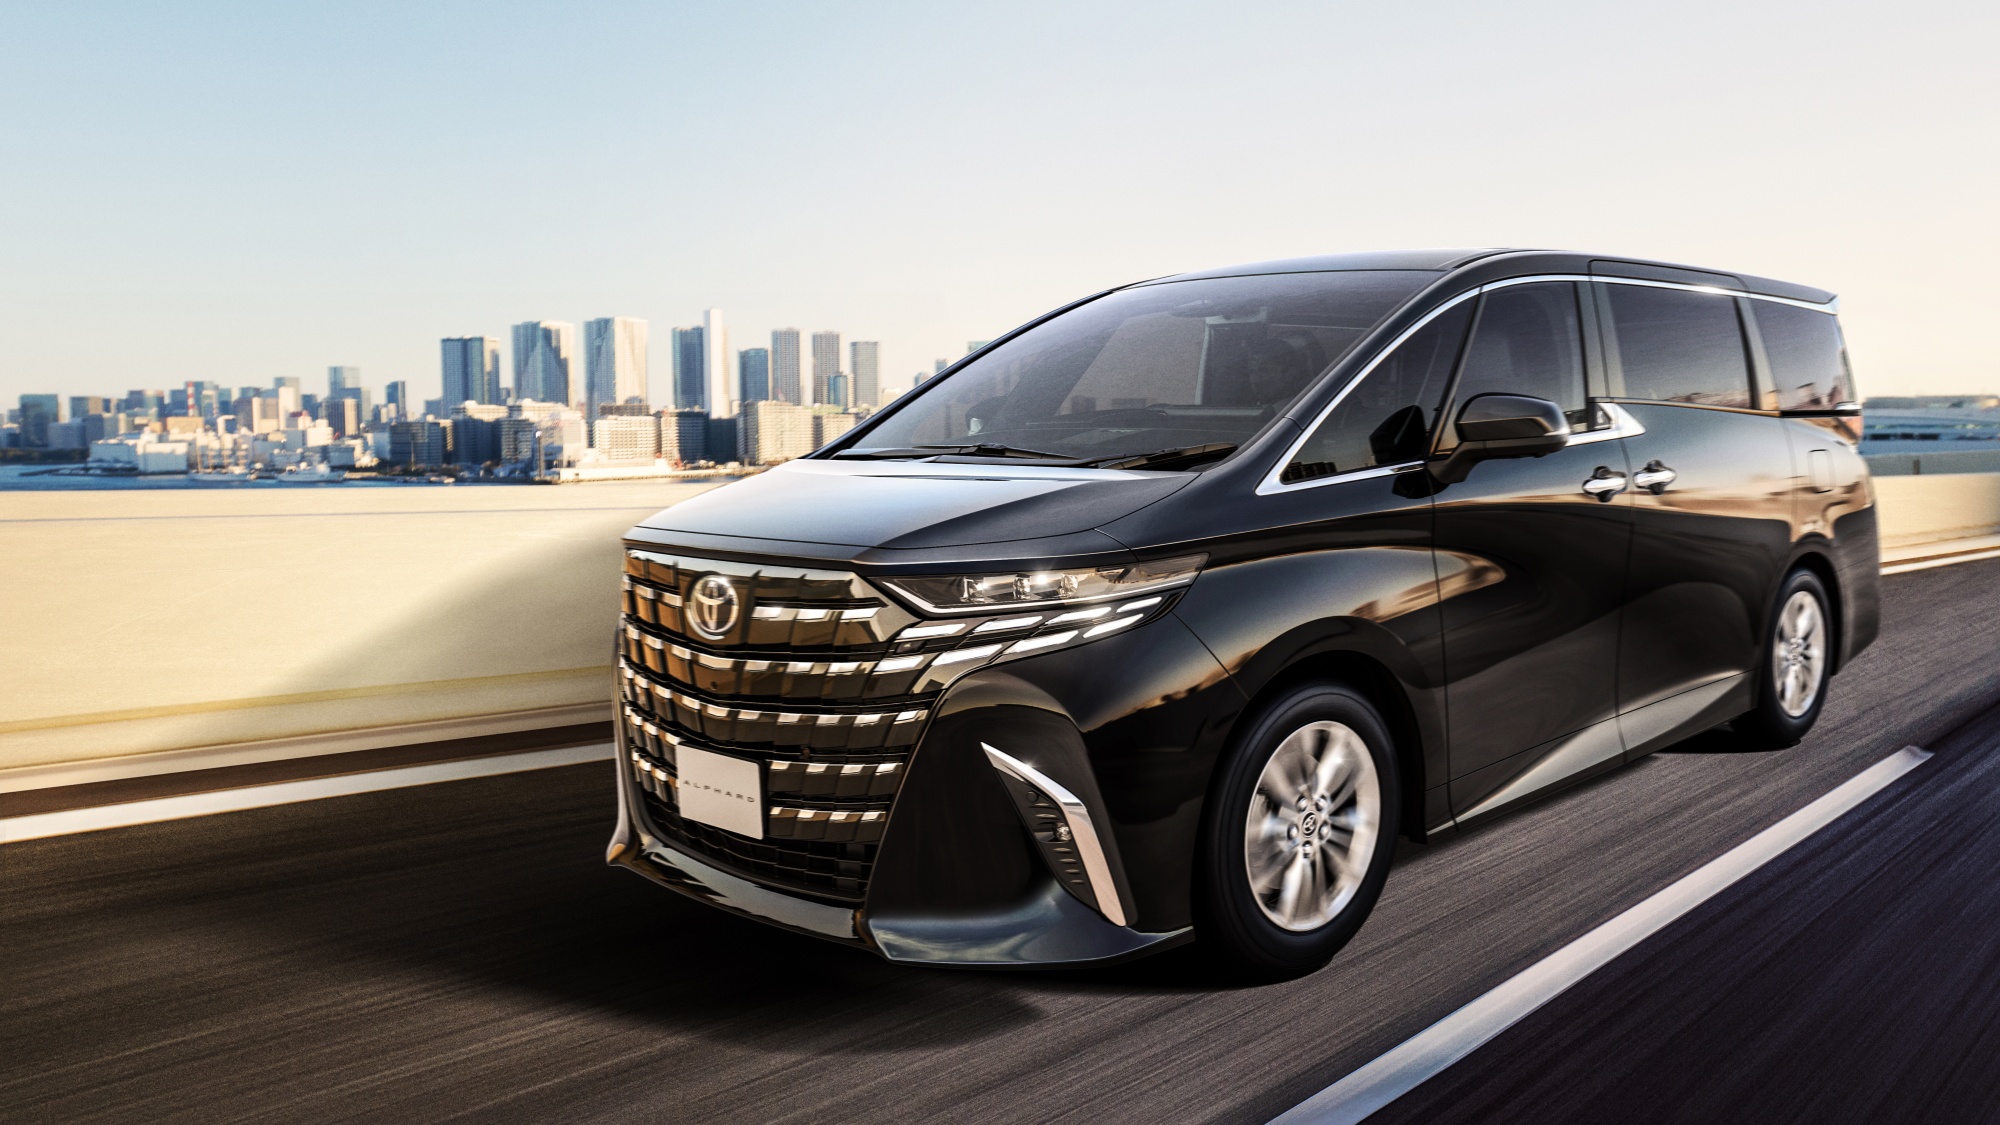 Toyota Updates Luxury Alphard and Vellfire Models With New Look